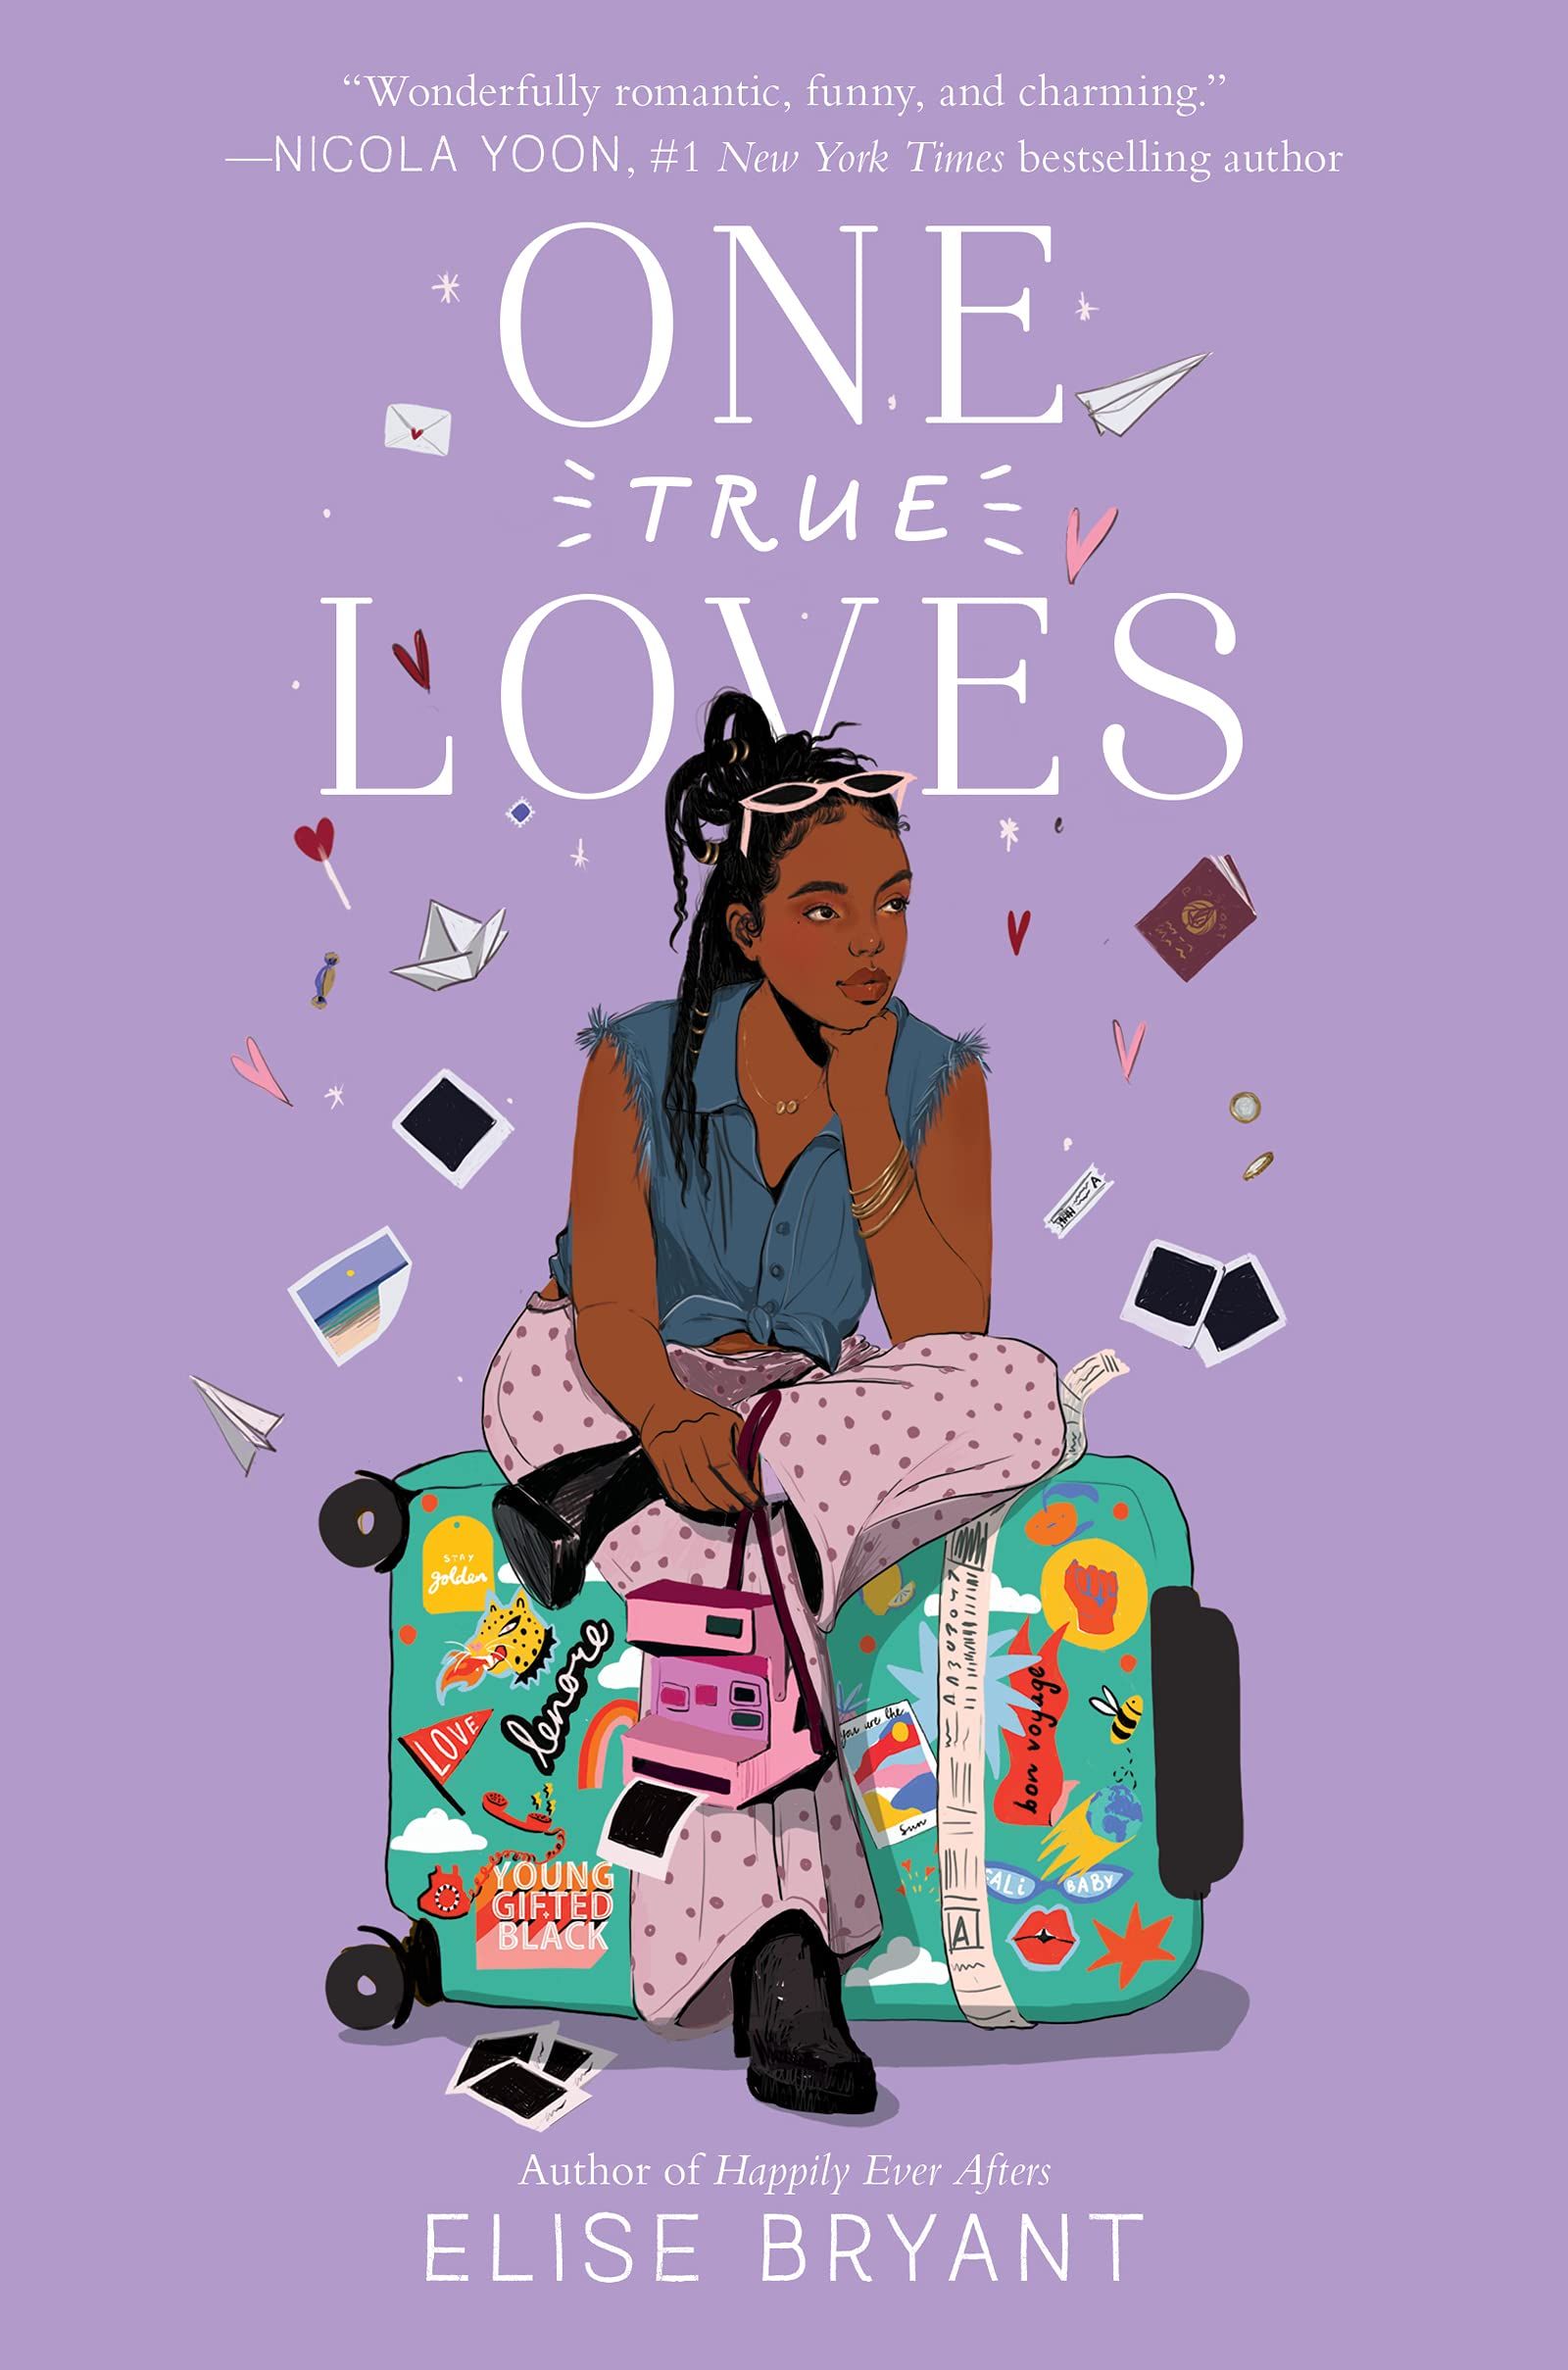 Cover Image of "One True Loves" by Elise Bryant.